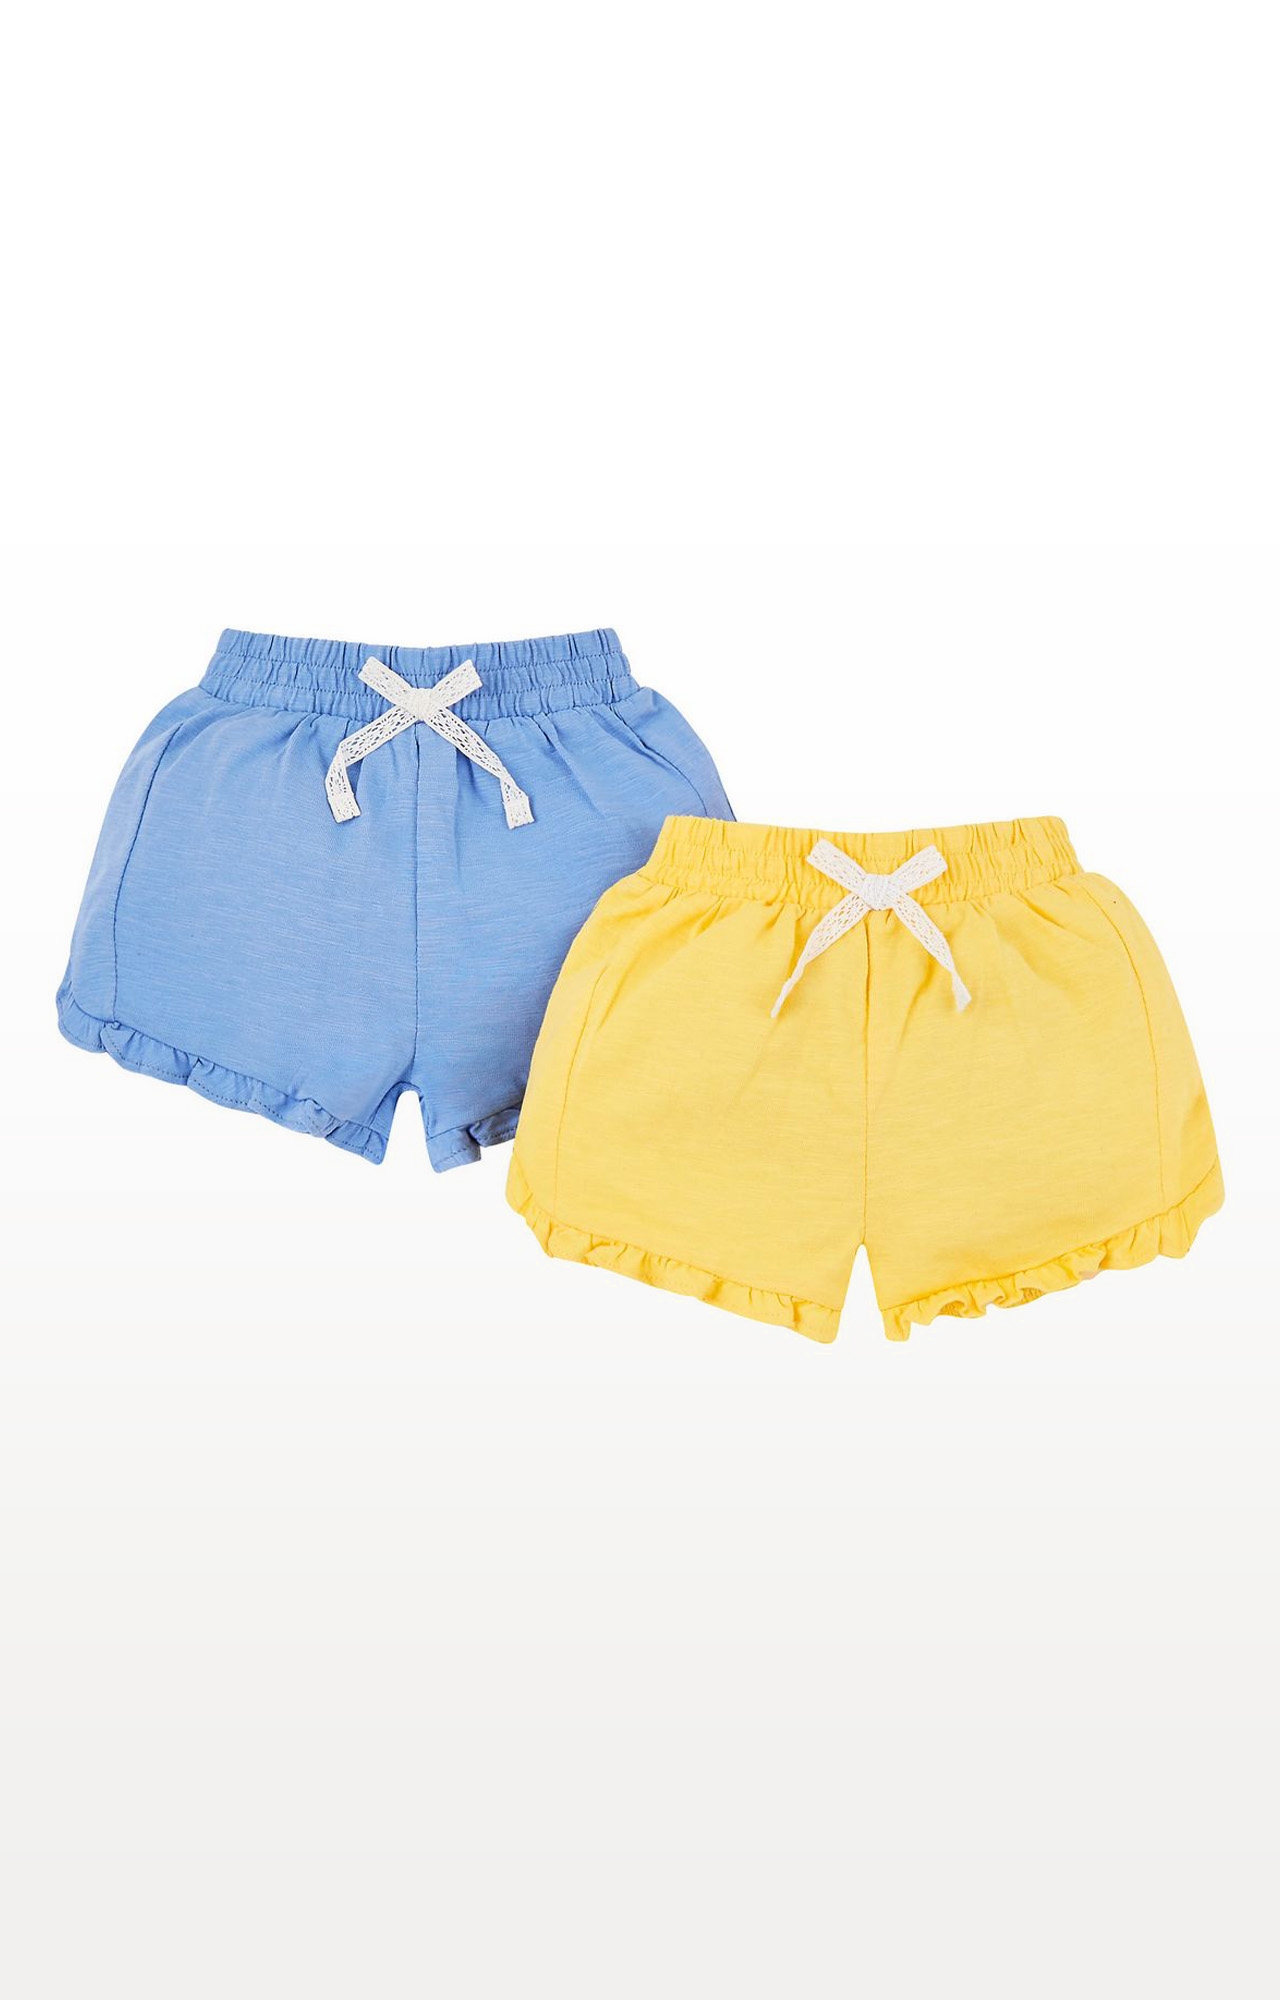 Yellow and Blue Printed Shorts - Pack of 2